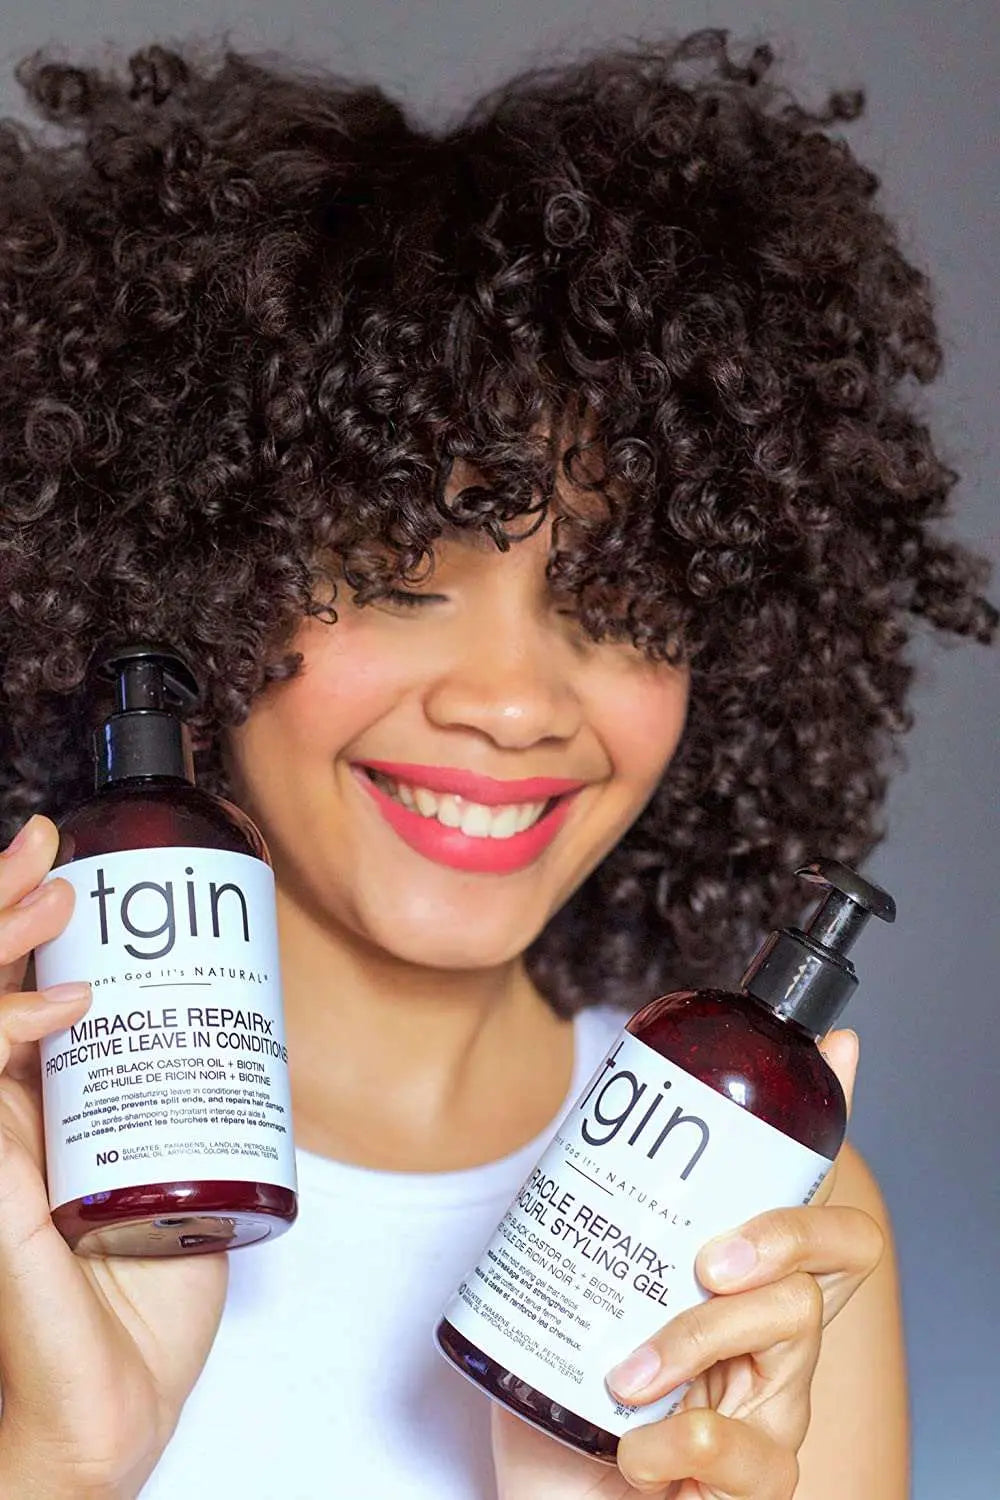 TGIN MIRACLE REPAIRX Protective Leave in Conditioner